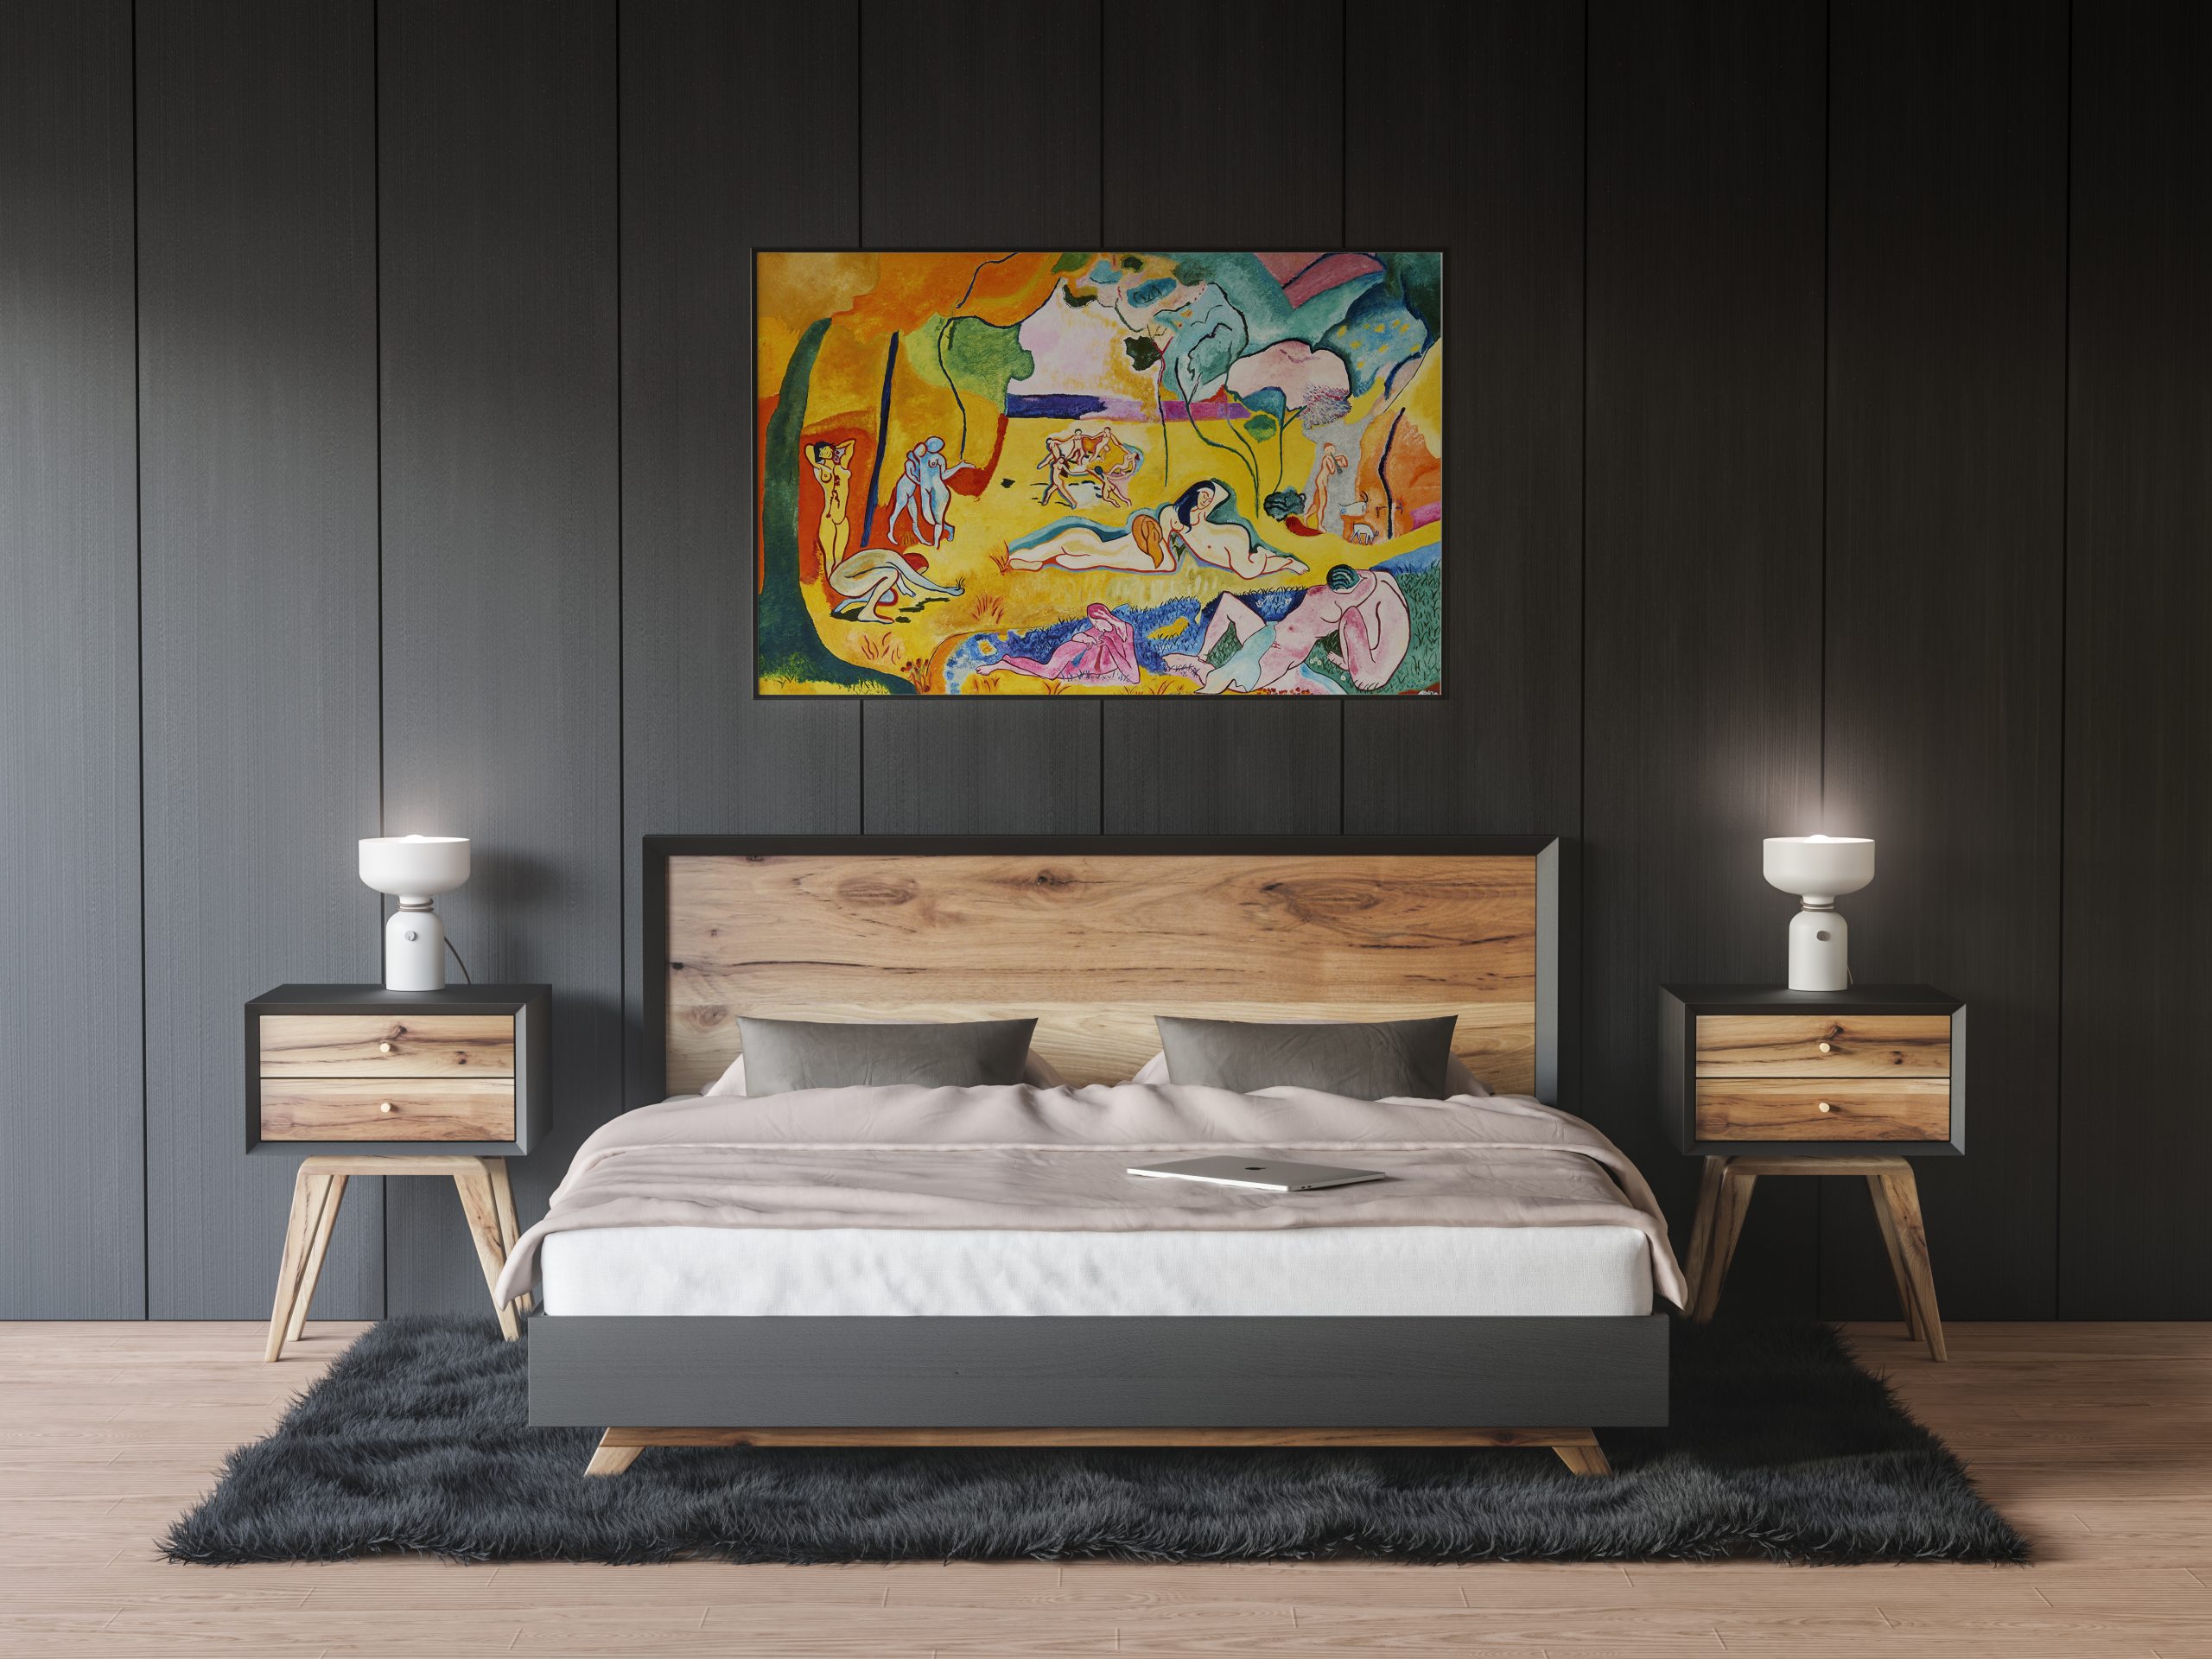 a painting is suspended above a bedding